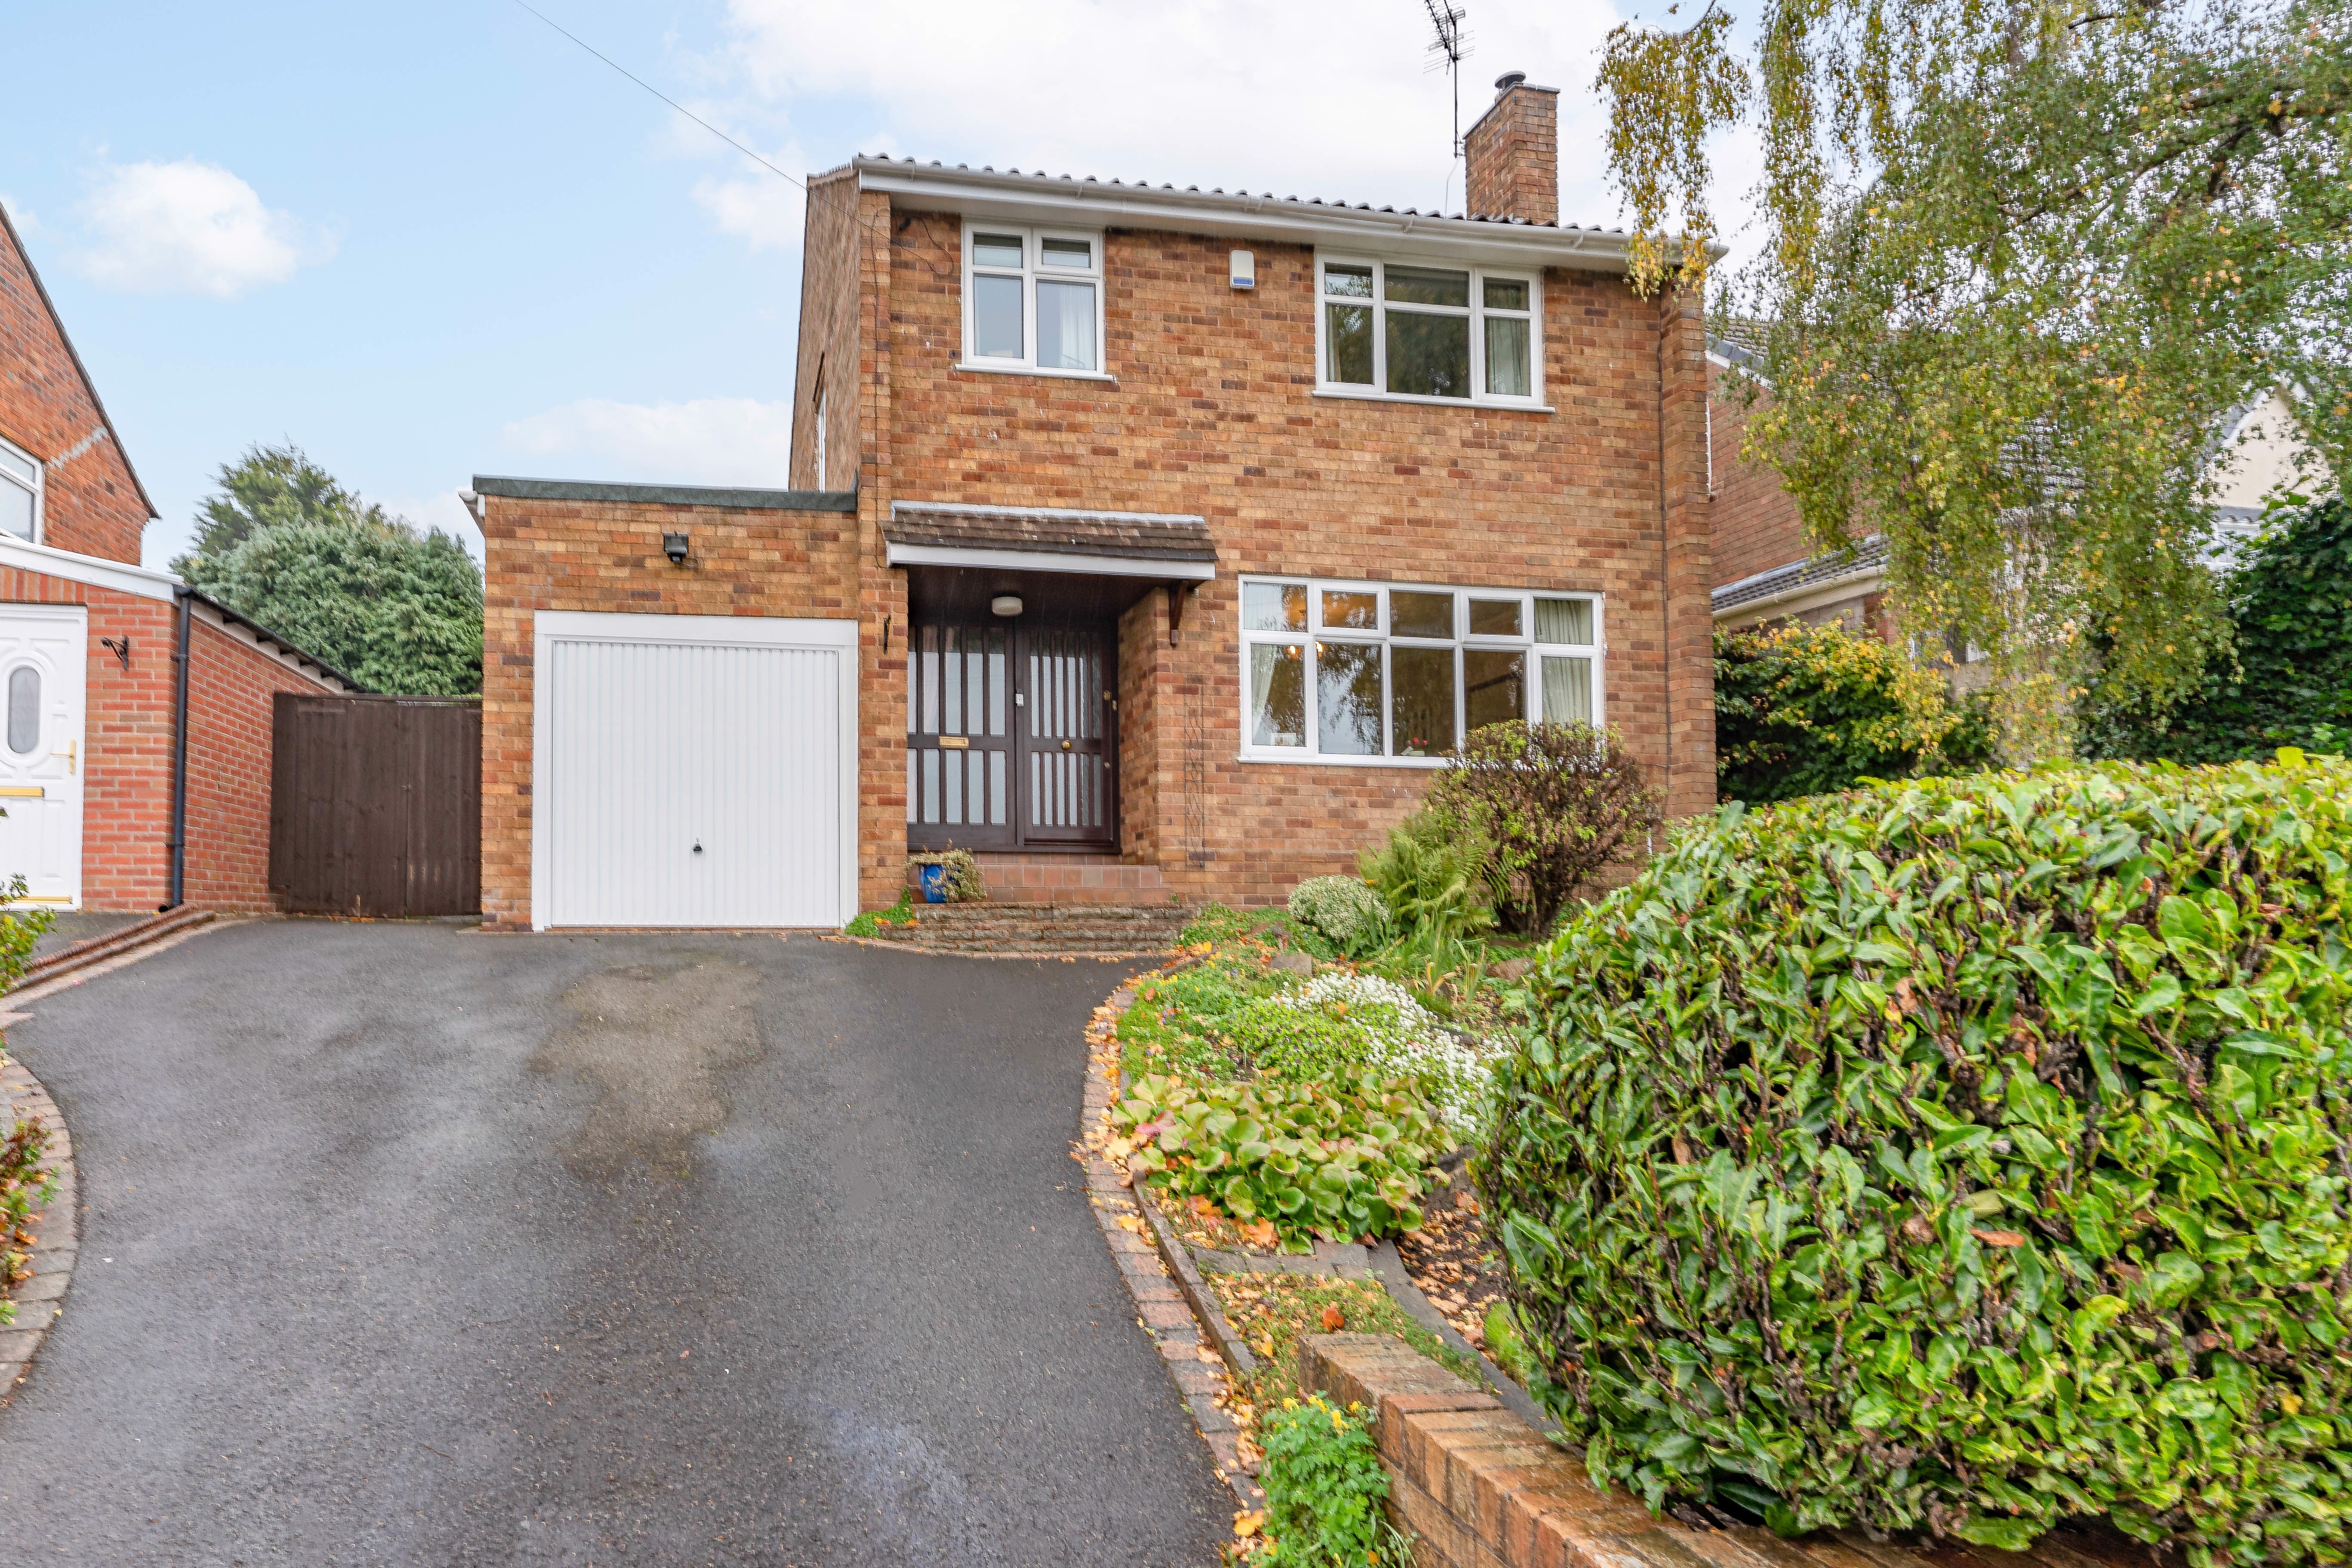 3 bed house for sale in Oakfield Avenue, Kingswinford  - Property Image 1